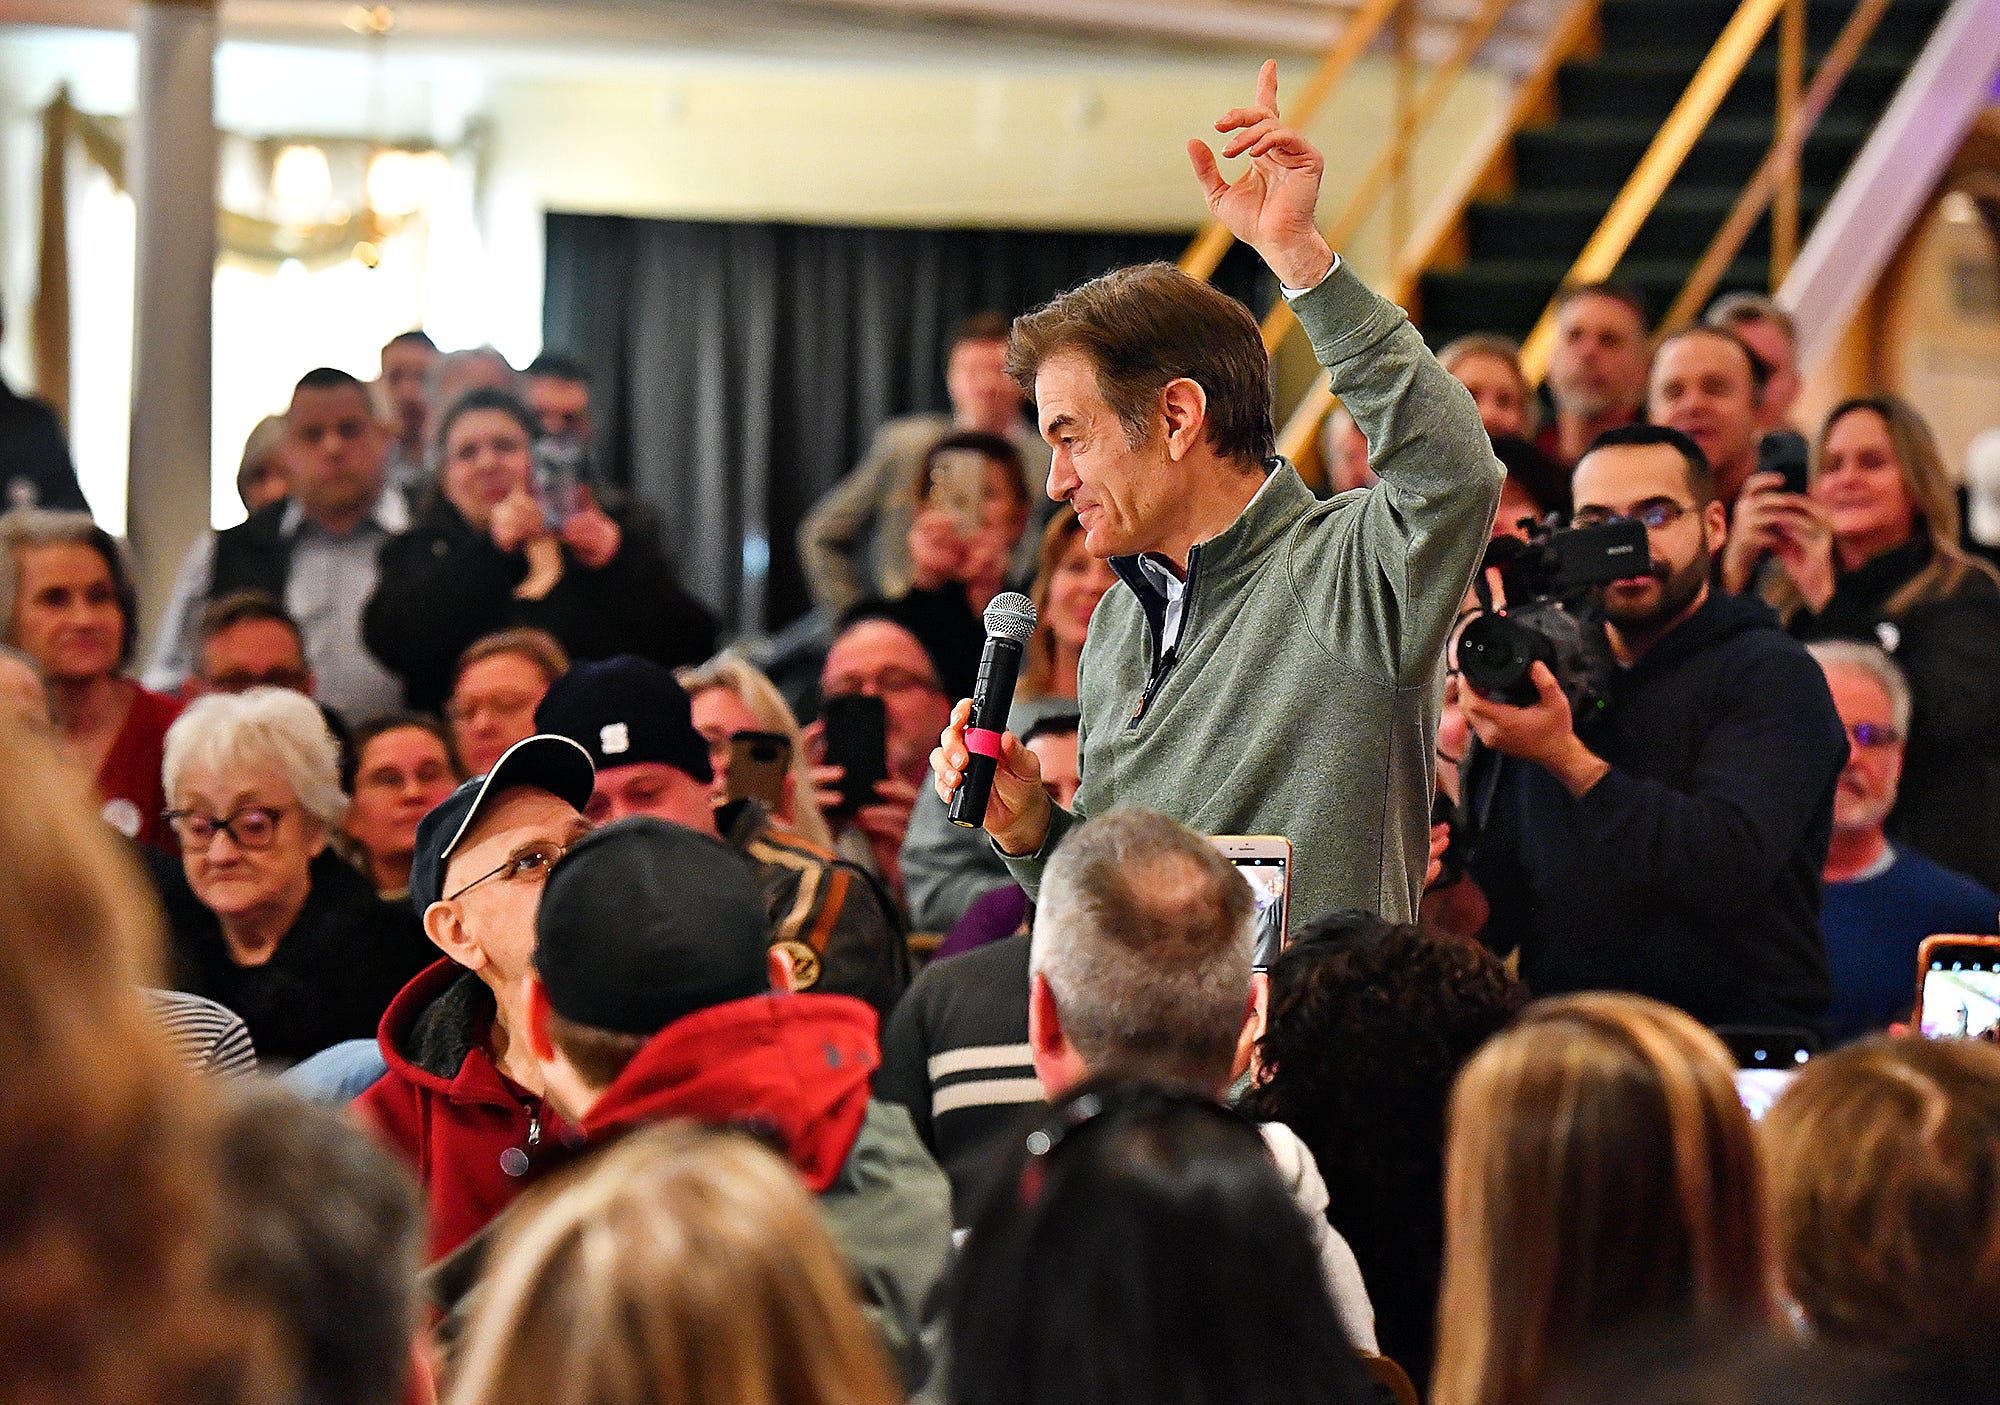 Supporteres look on as Dr. Mehmet Oz makes his entrance during the Doctor Oz for Senate campaign tour stop at Wisehaven Event Center in Windsor Township, Saturday, Feb. 5, 2022. Event organizers estimate about 350 were in attendance. Dawn J. Sagert photo